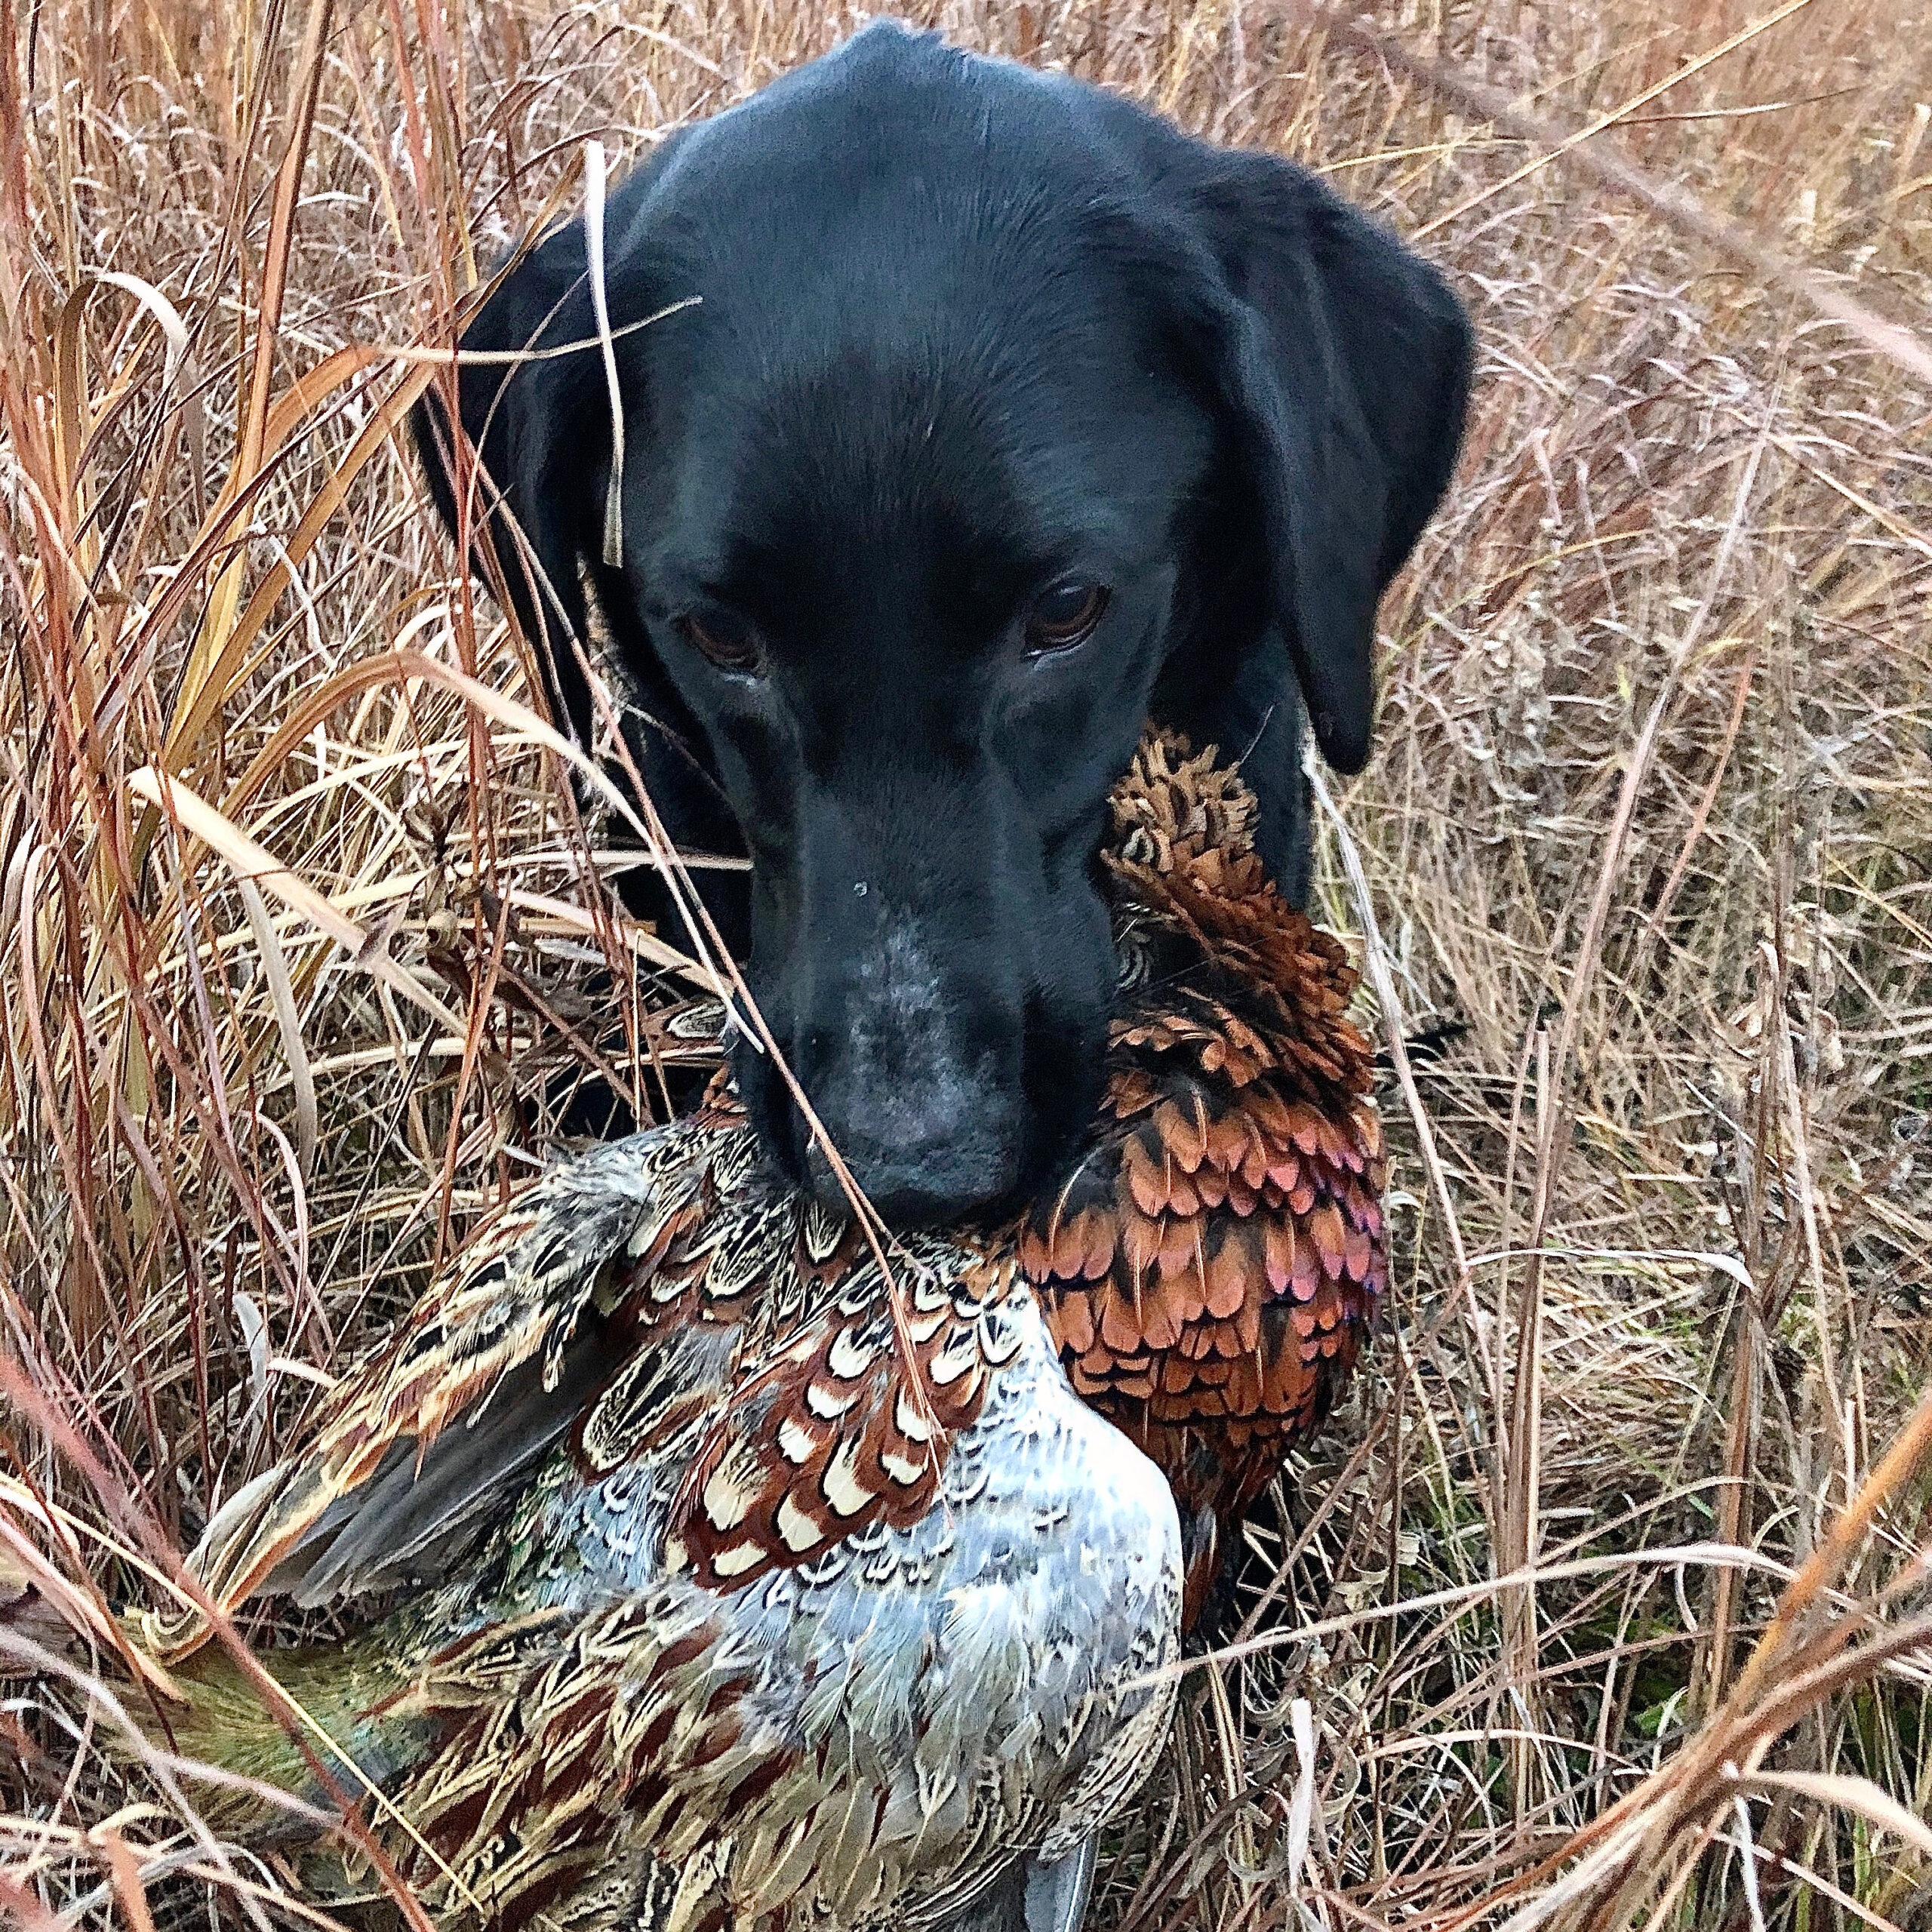 The author's dog Otis with a hard-earned Minnesota rooster.